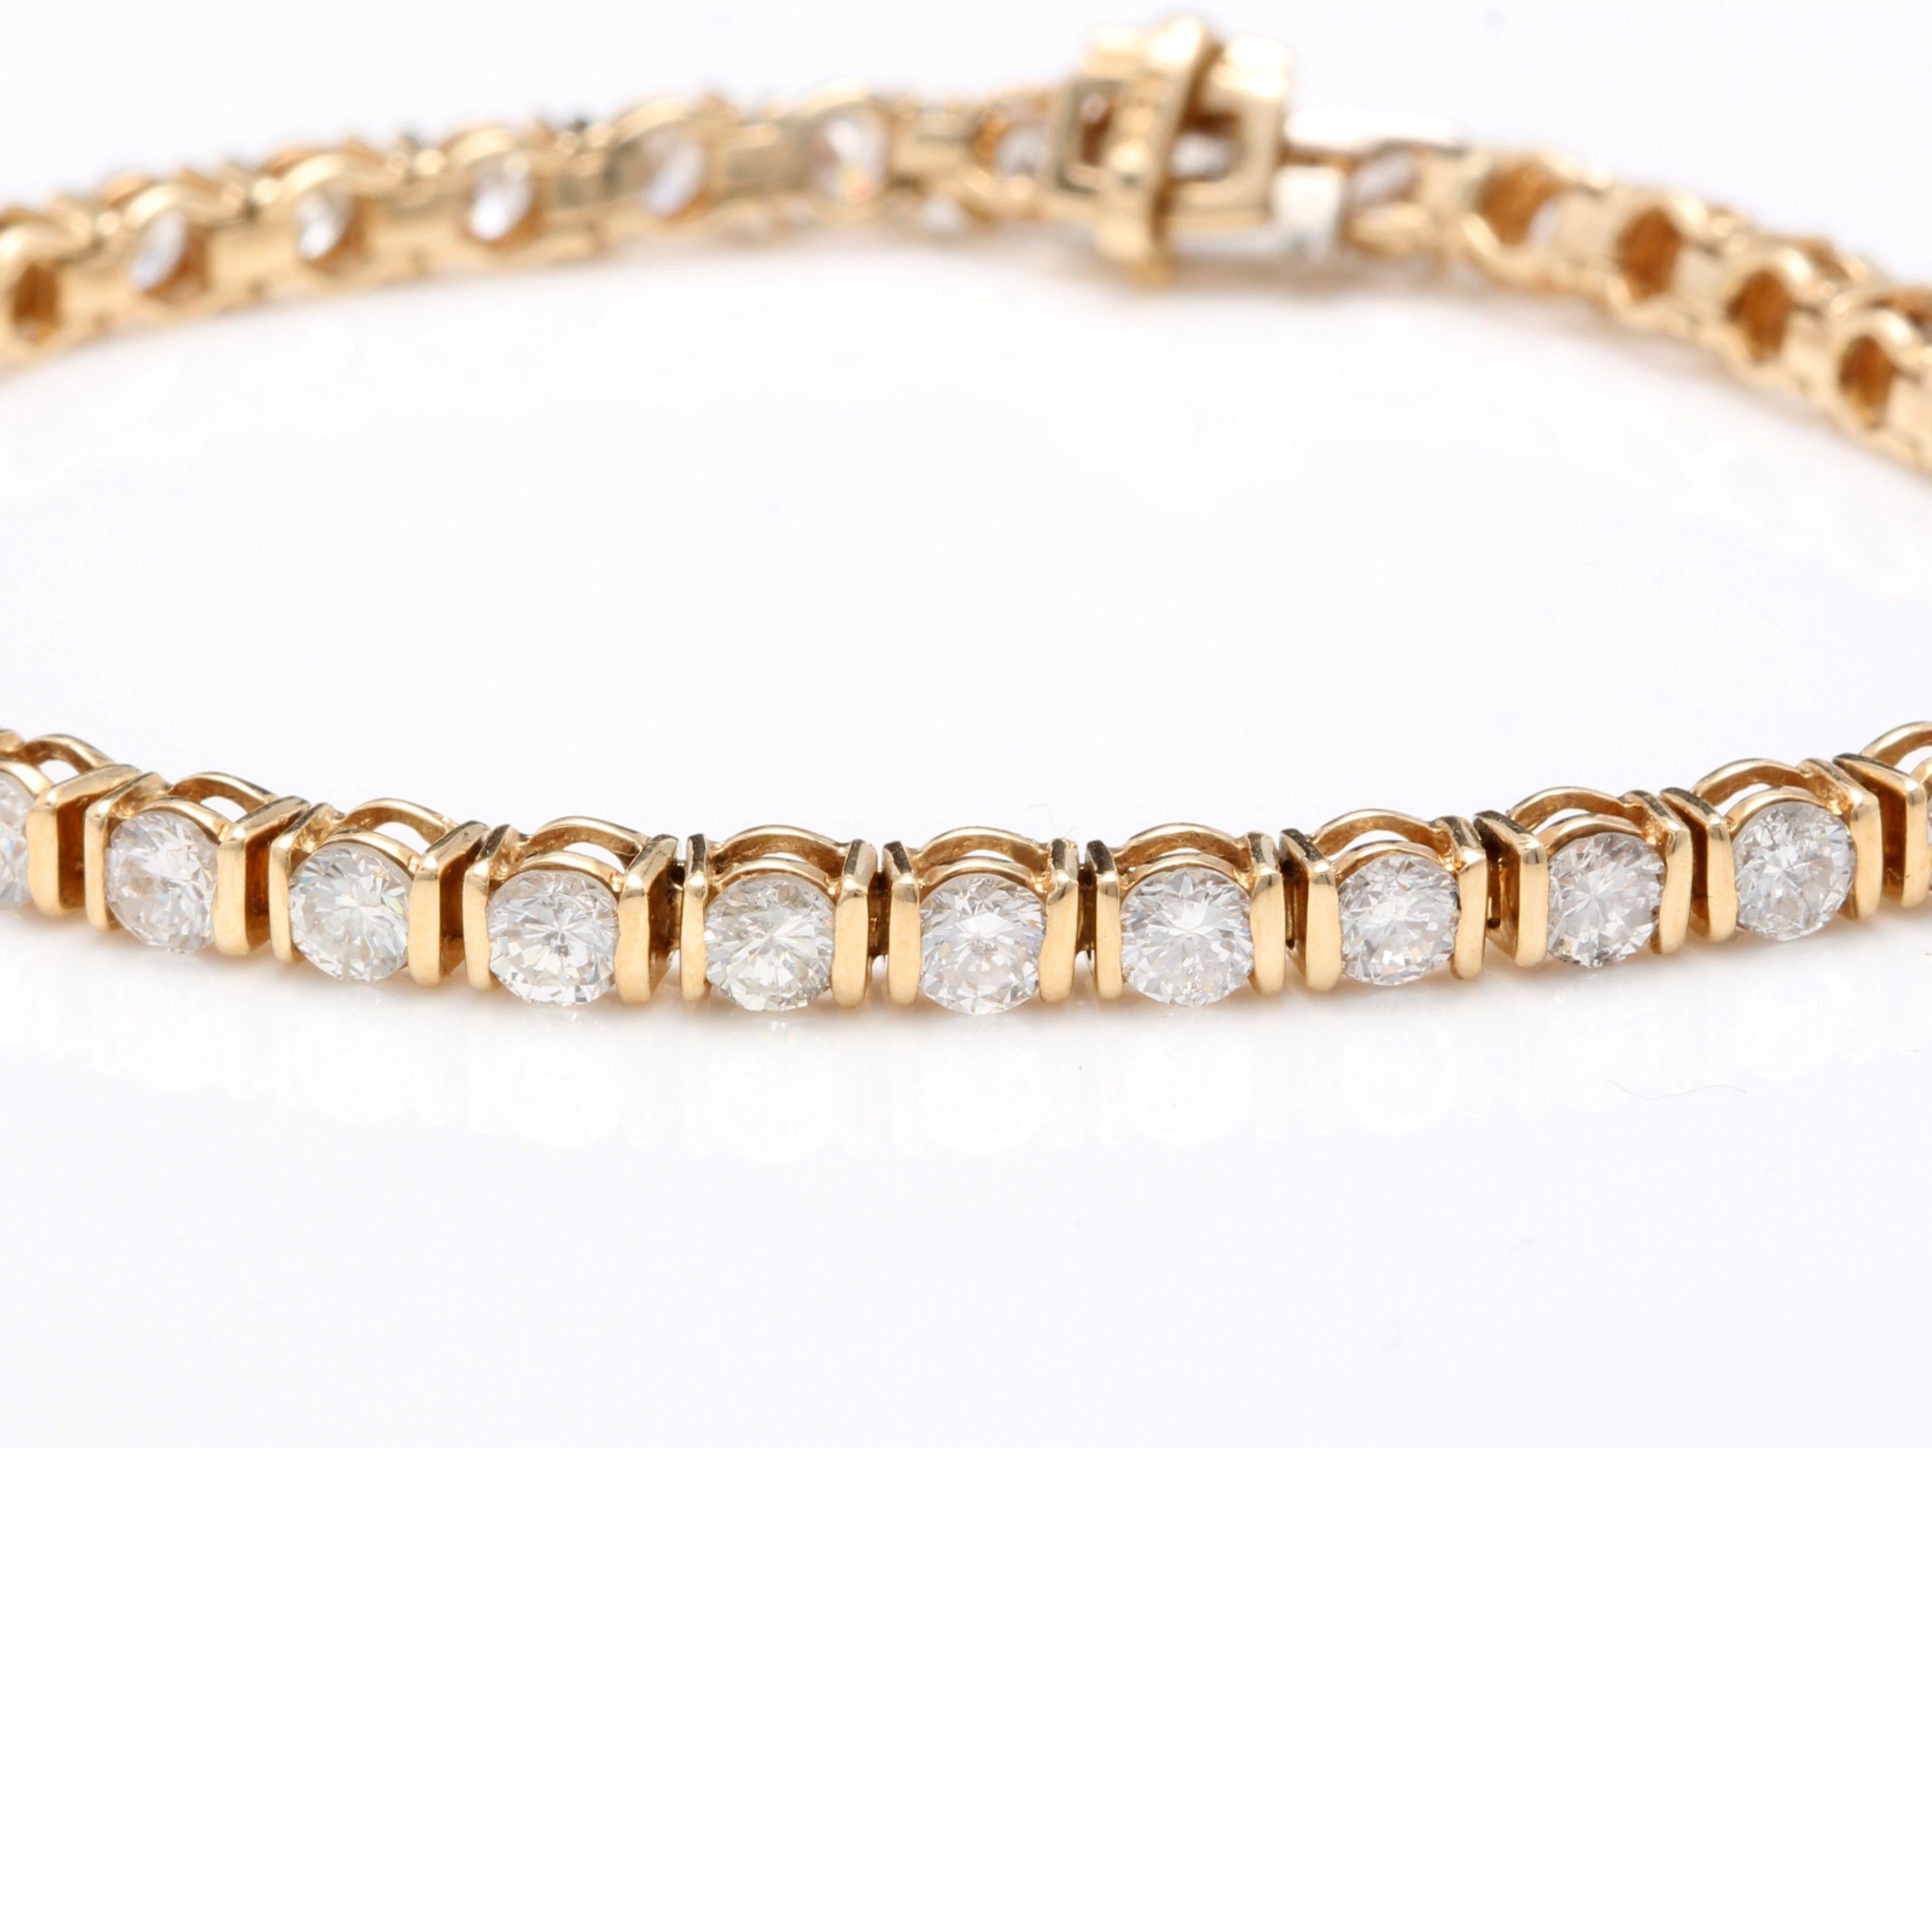 Very Impressive 5.70 Carats Natural Diamond 14K Solid Yellow Gold Bracelet

STAMPED: 14K

Total Natural Round Diamonds Weight: 5.70 Carats (color G-H / Clarity SI1-SI2)

Bracelet Length is: 7 inches

Width: 3.6mm

Bracelet total weight: